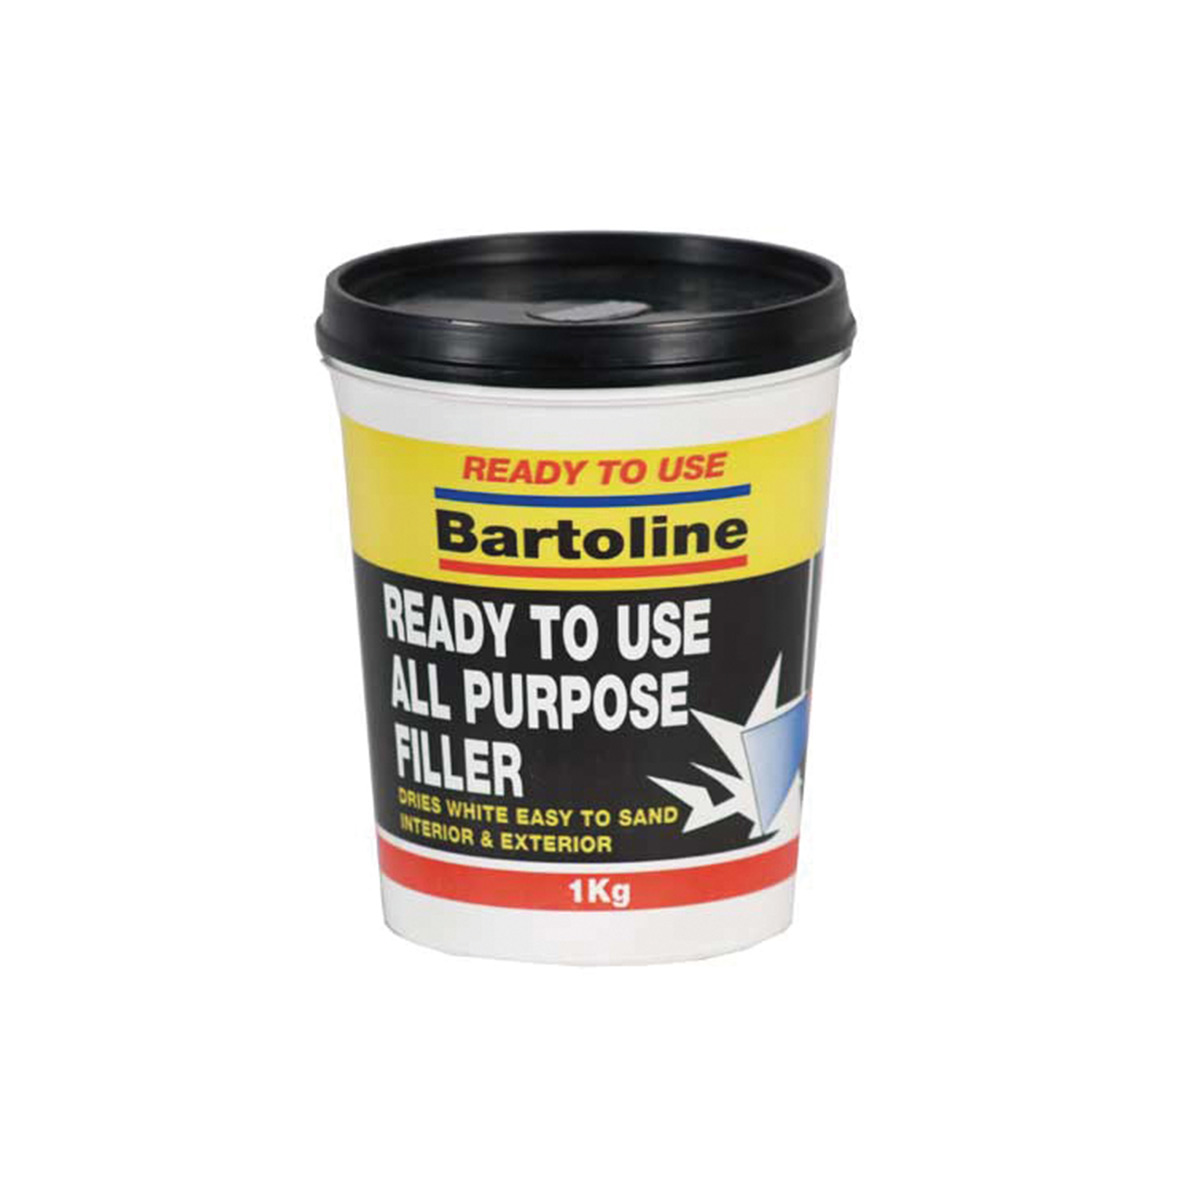 READY TO USE ALL PURPOSE FILLER